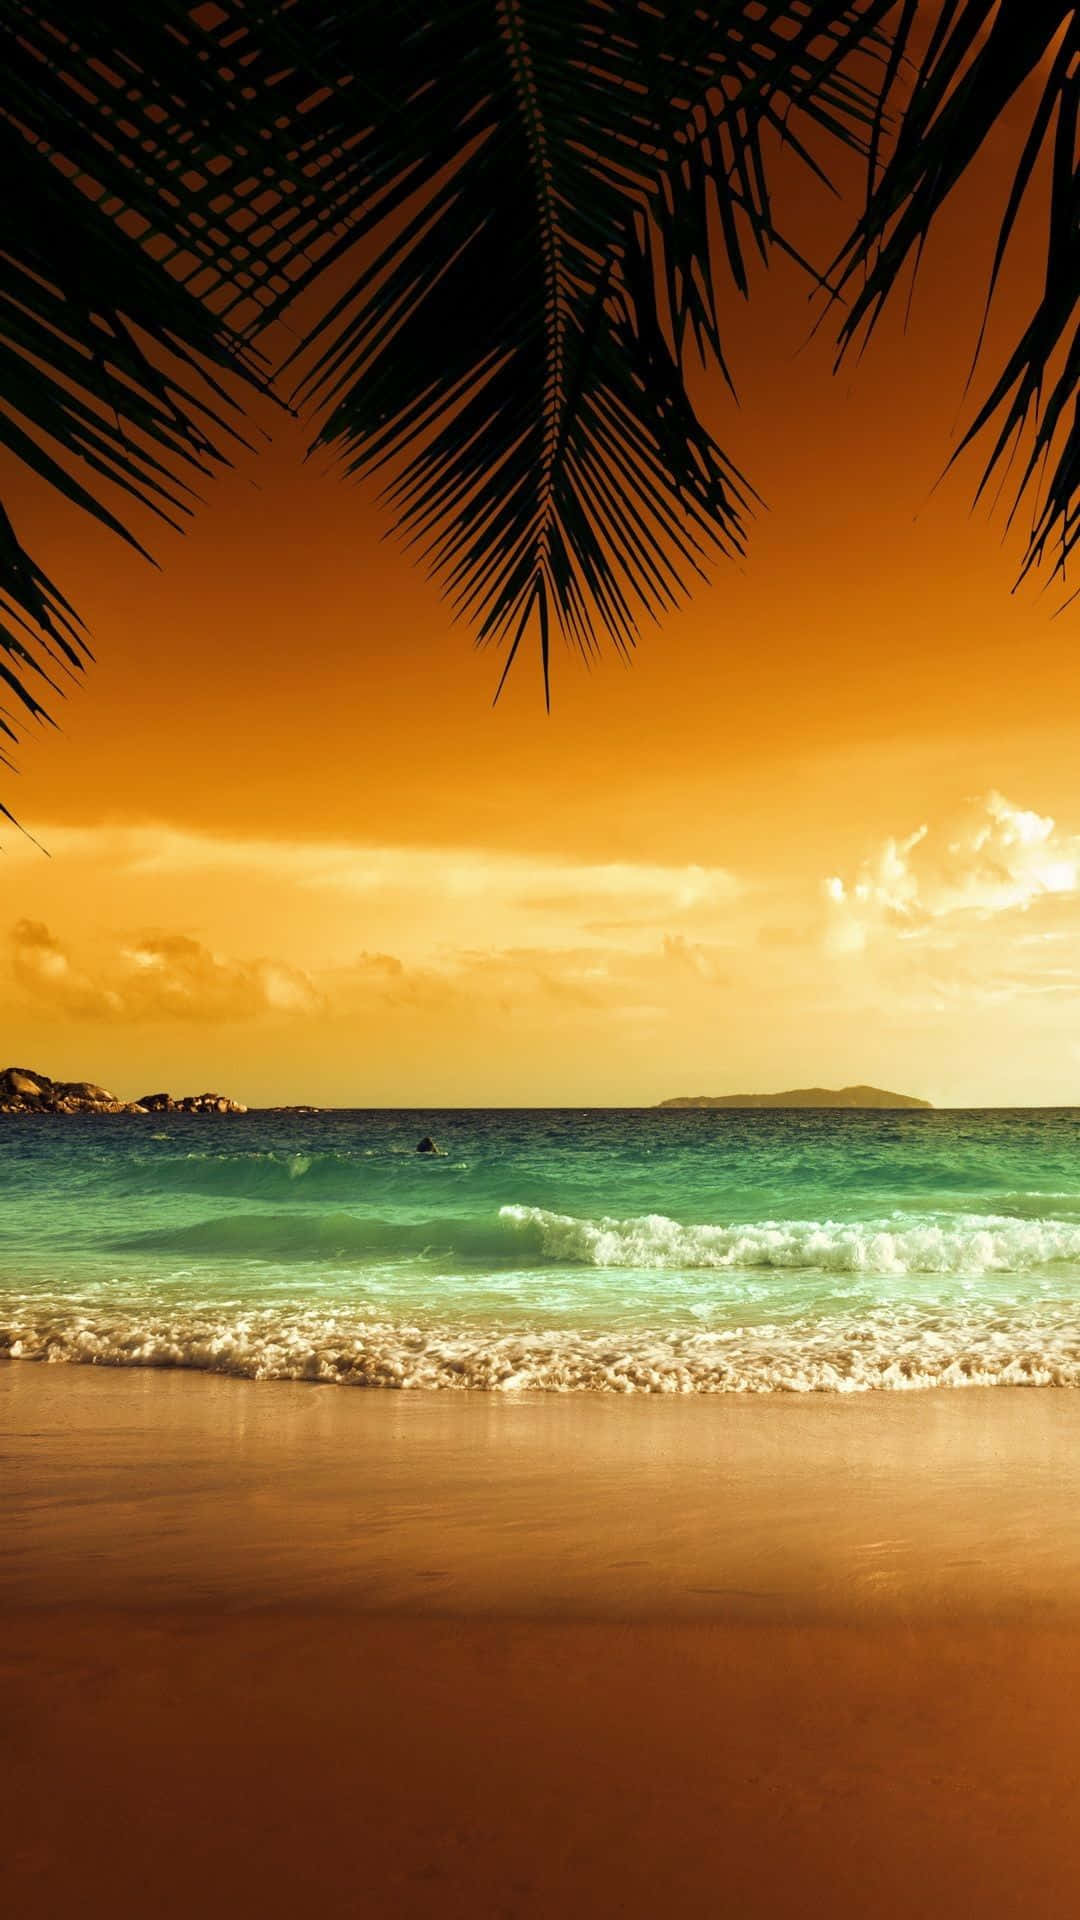 "Soak in the beautiful sunset at the beach with your iPhone in hand." Wallpaper